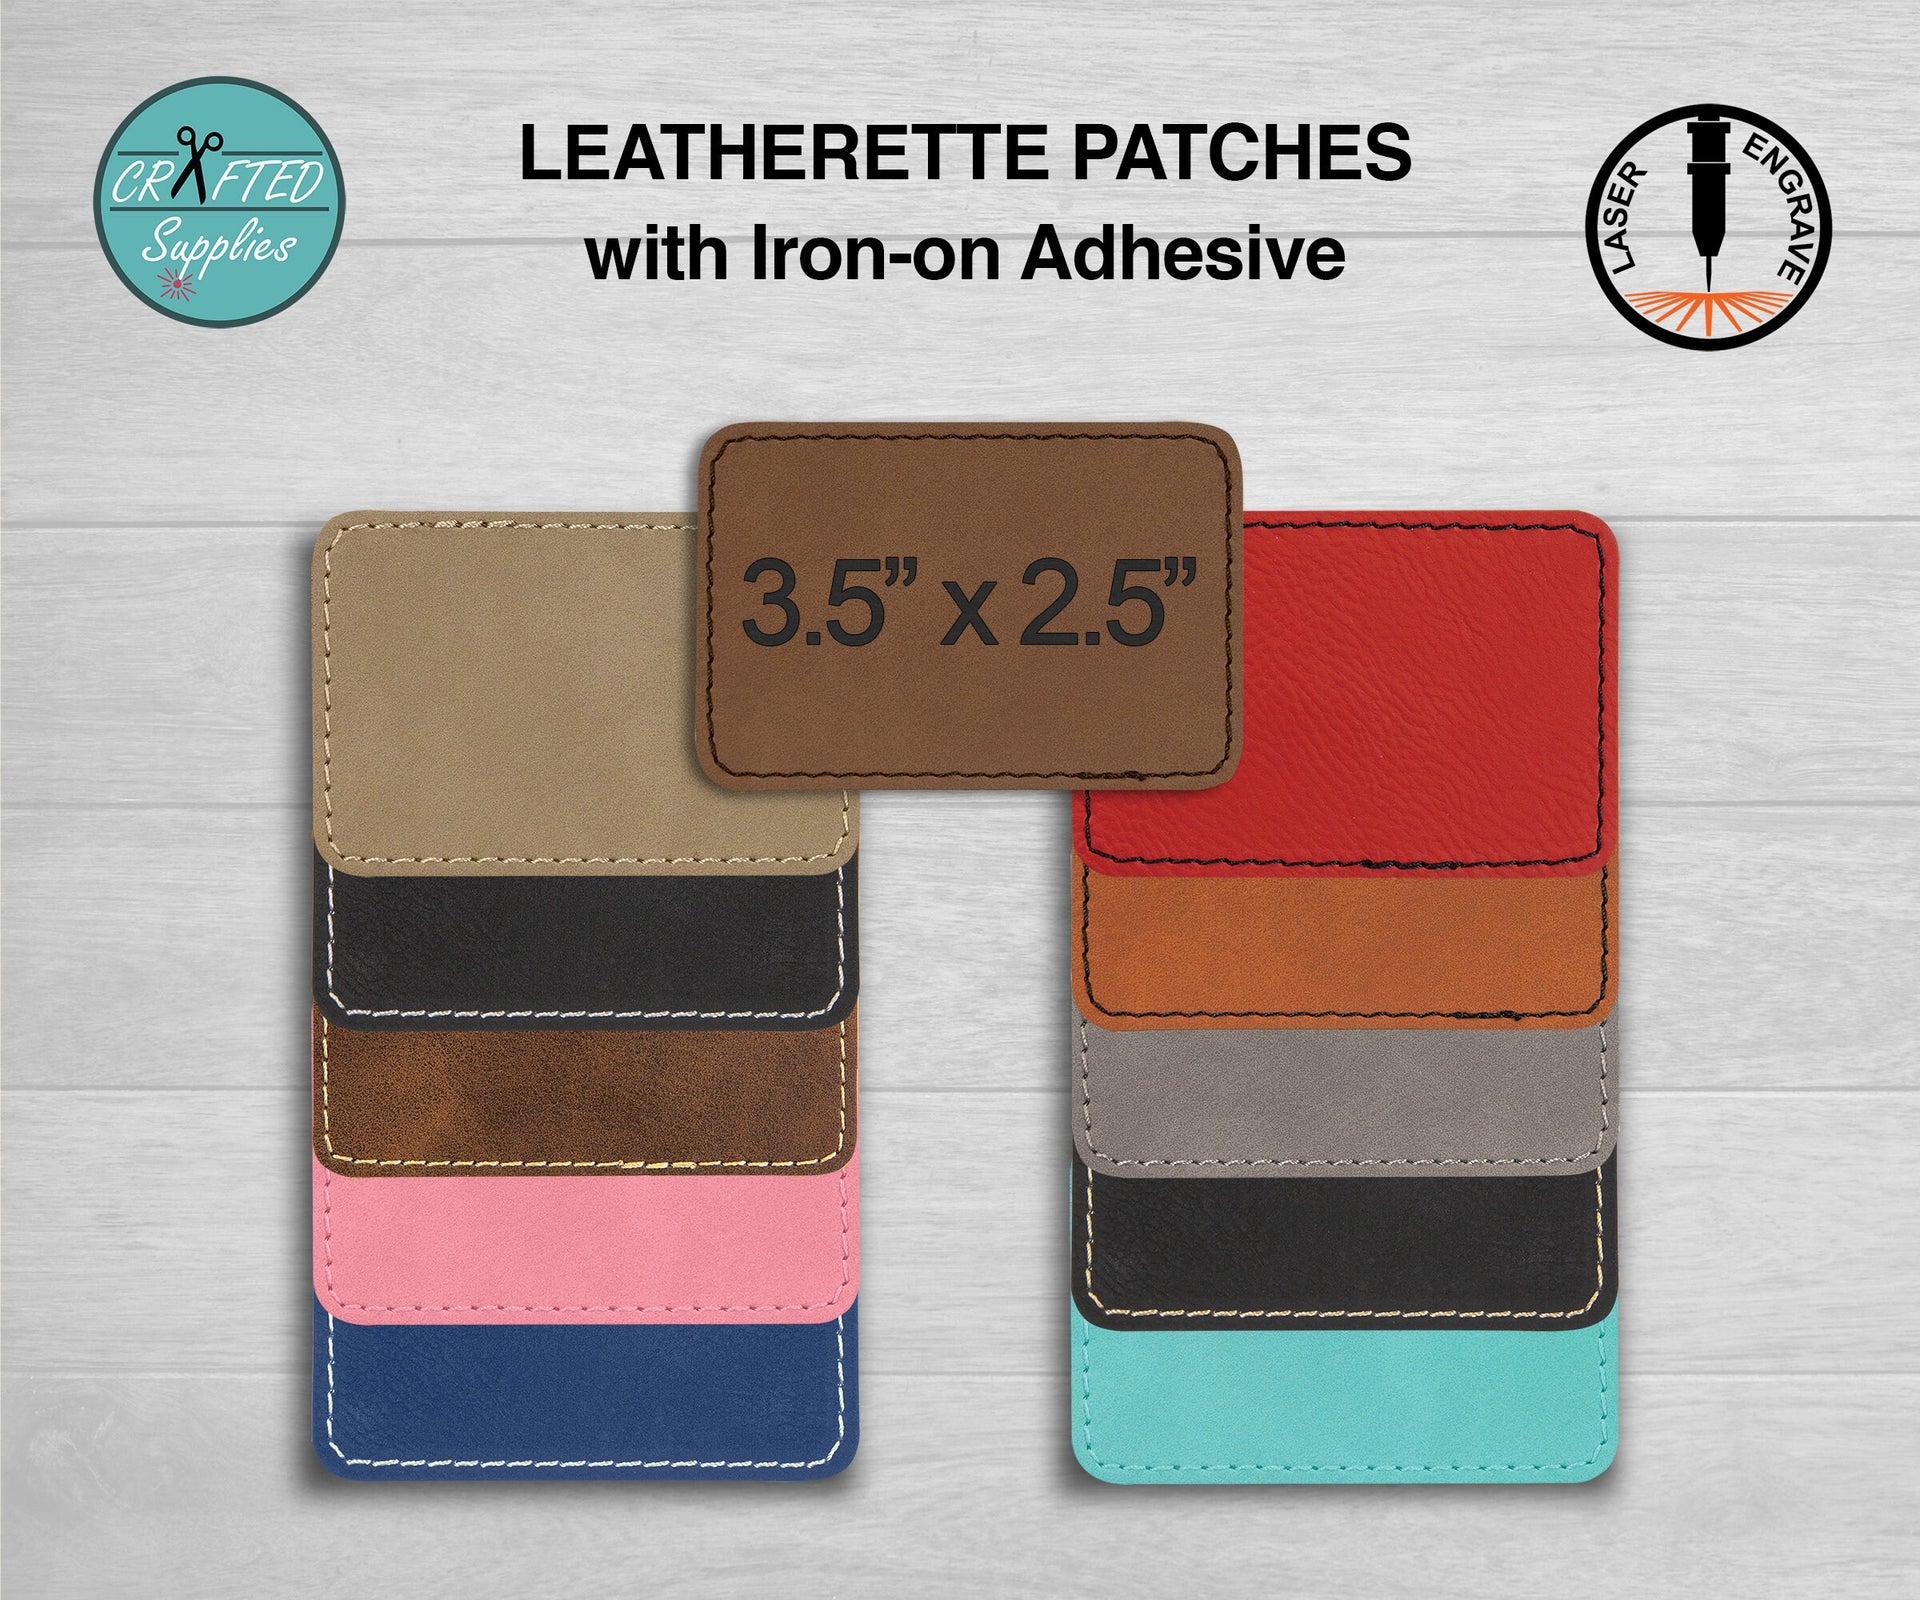 Leatherette Patch, LG Oval 3.5 in x 2.5 in